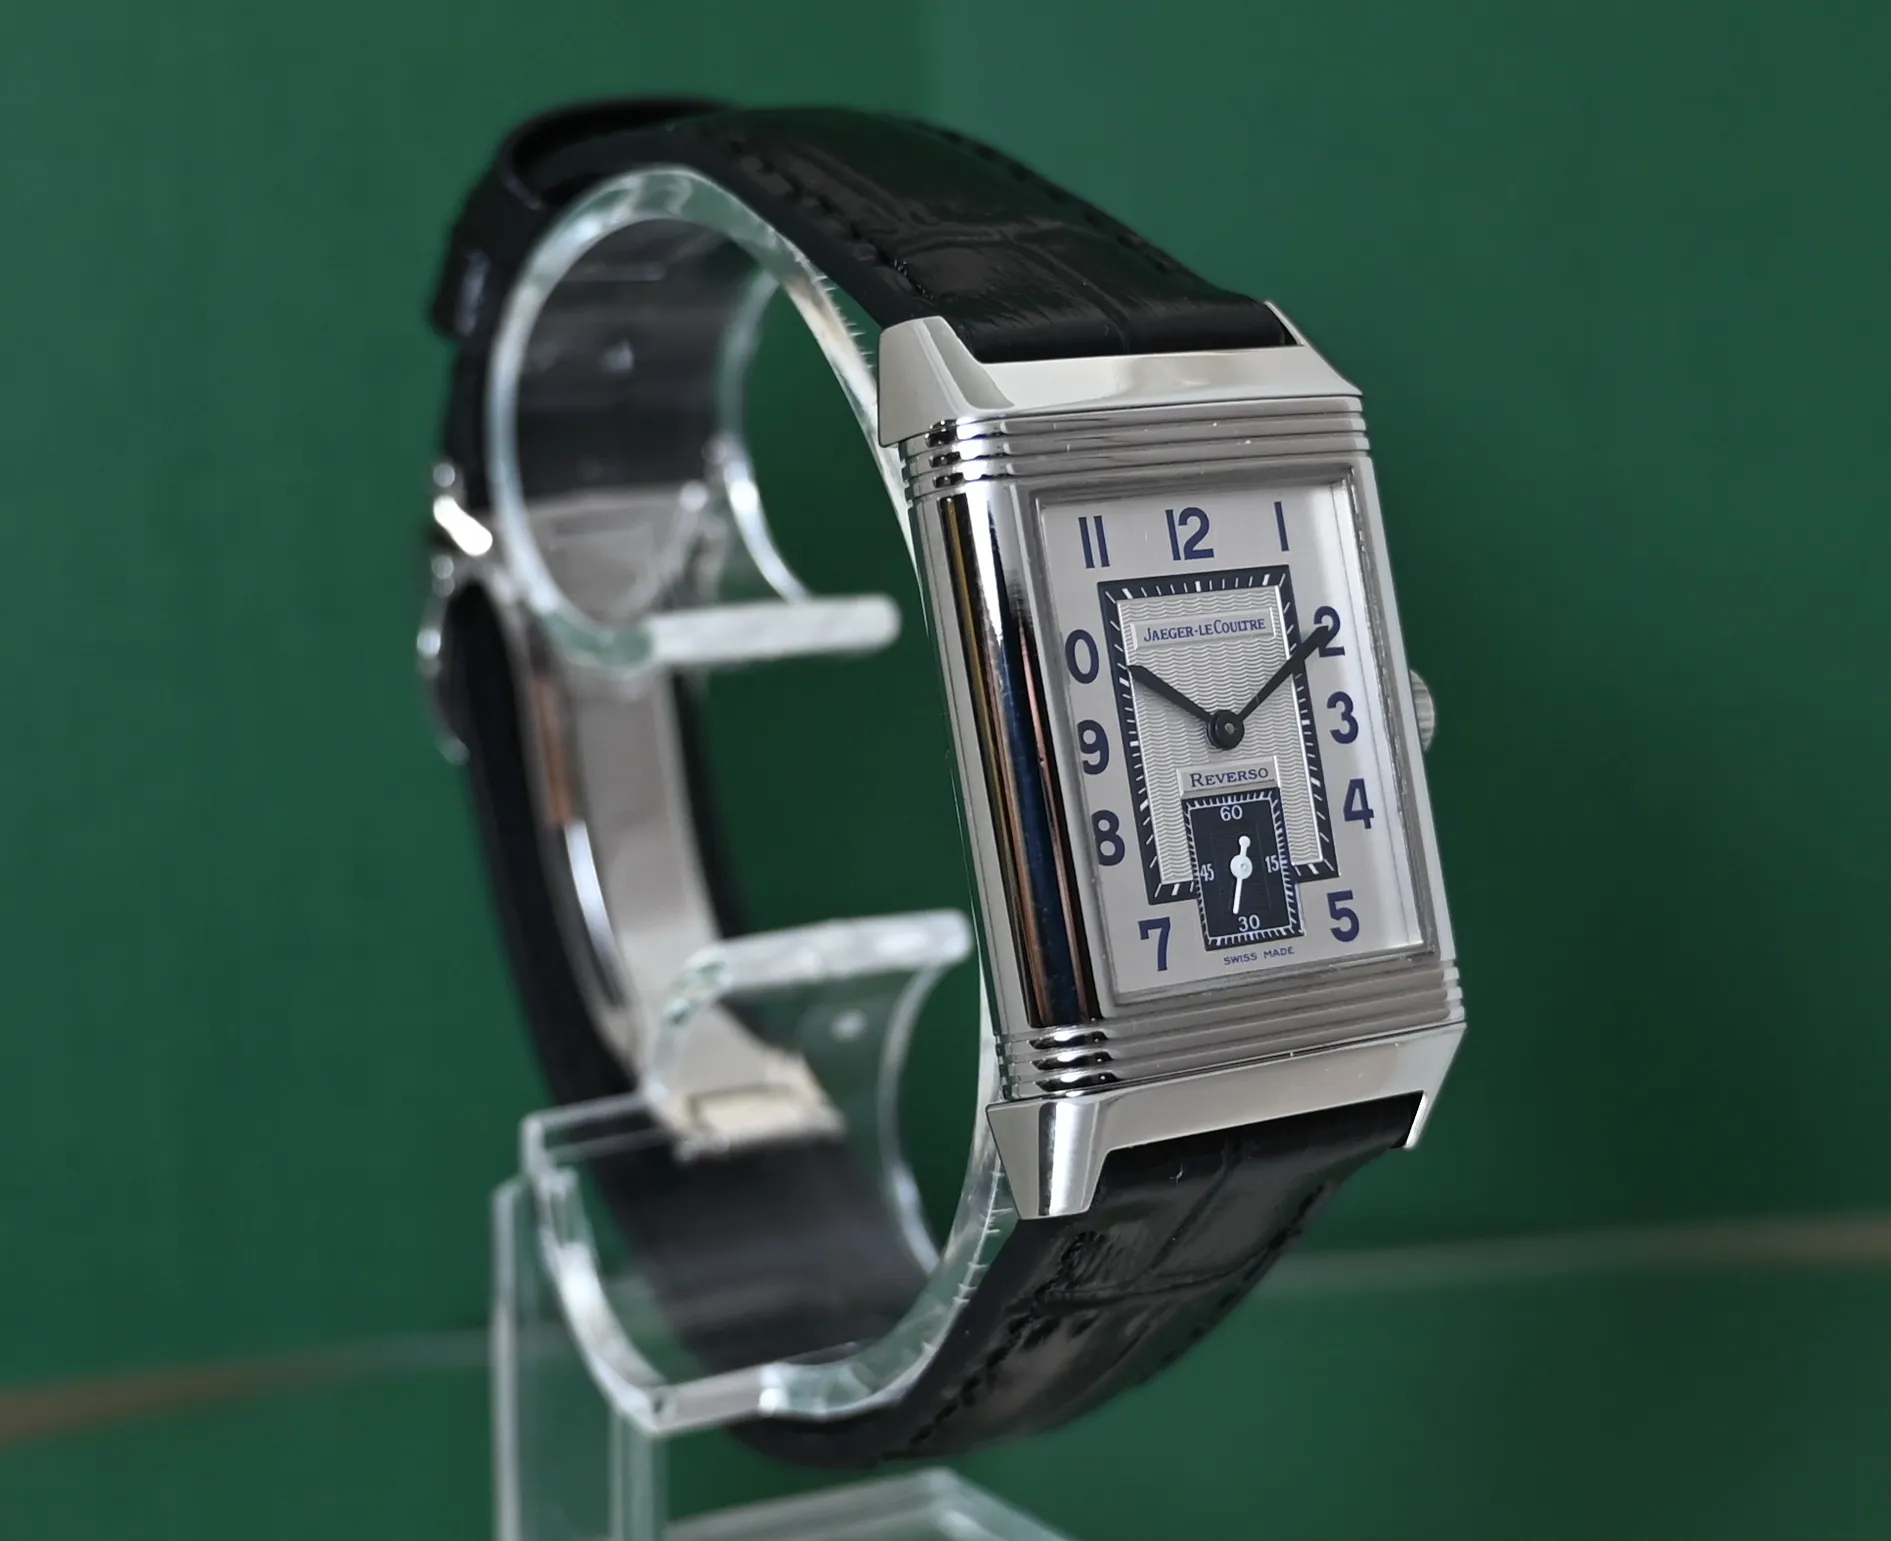 Jaeger-LeCoultre Reverso Grande Taille 270.8.62 26mm Stainless steel Silver 3